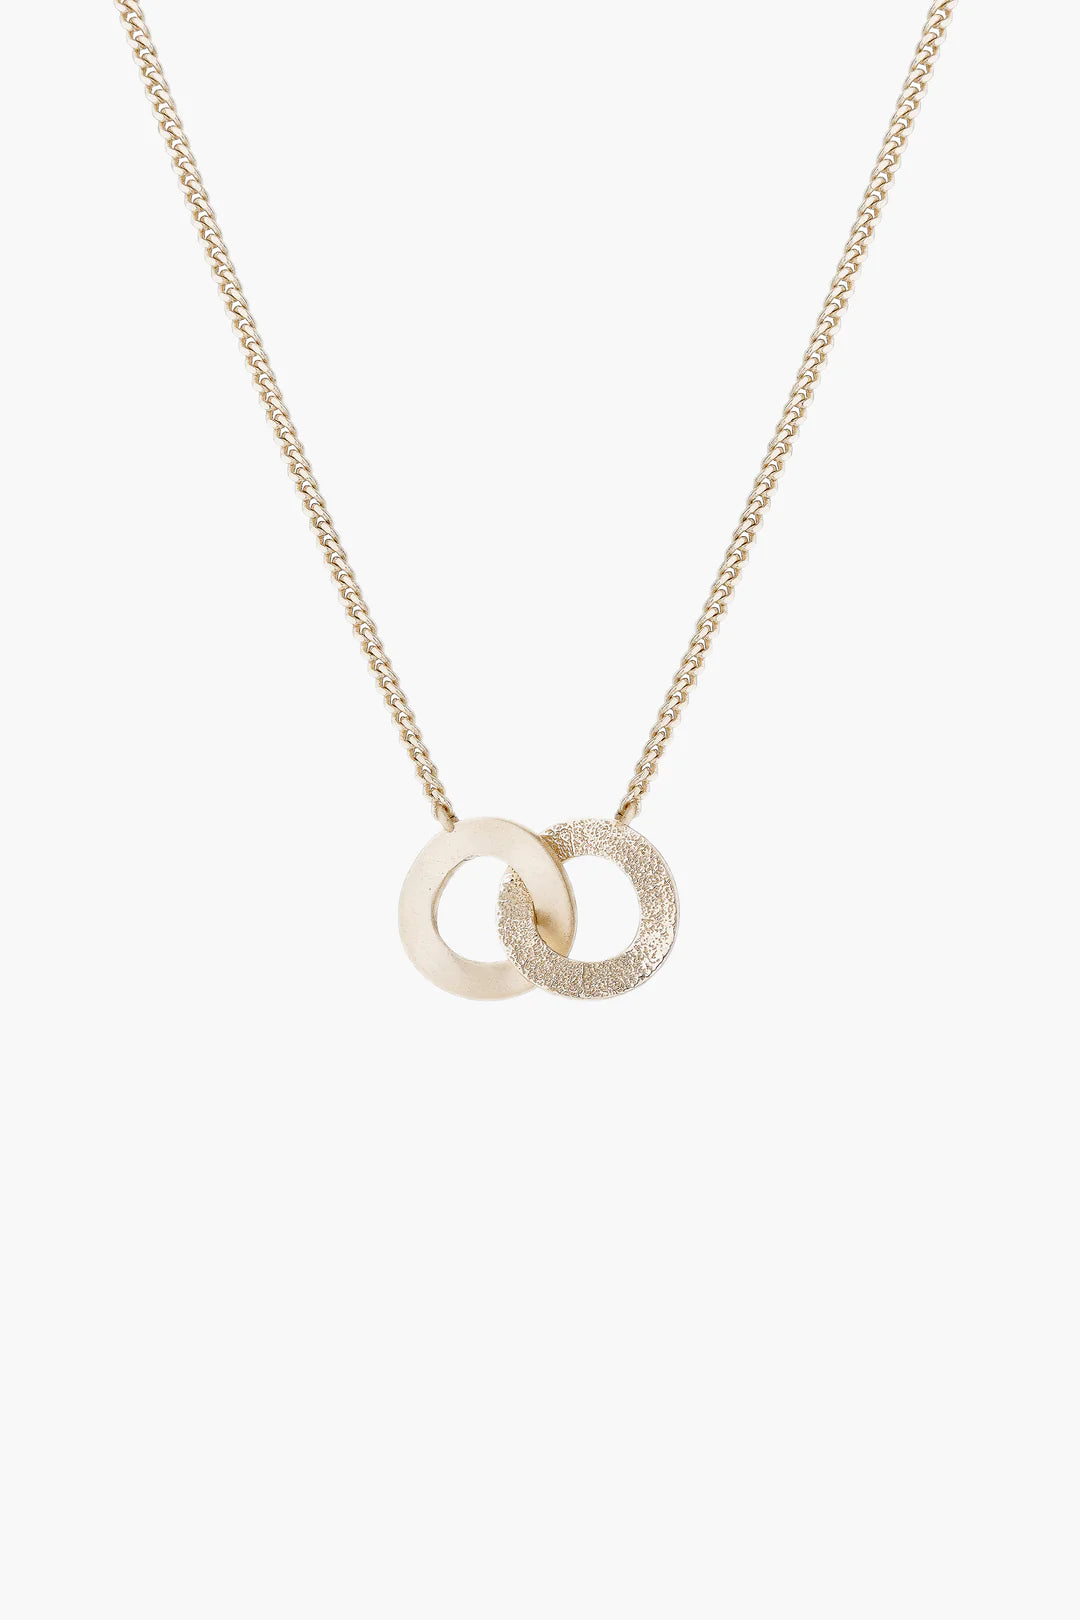 UNITY GOLD NECKLACE